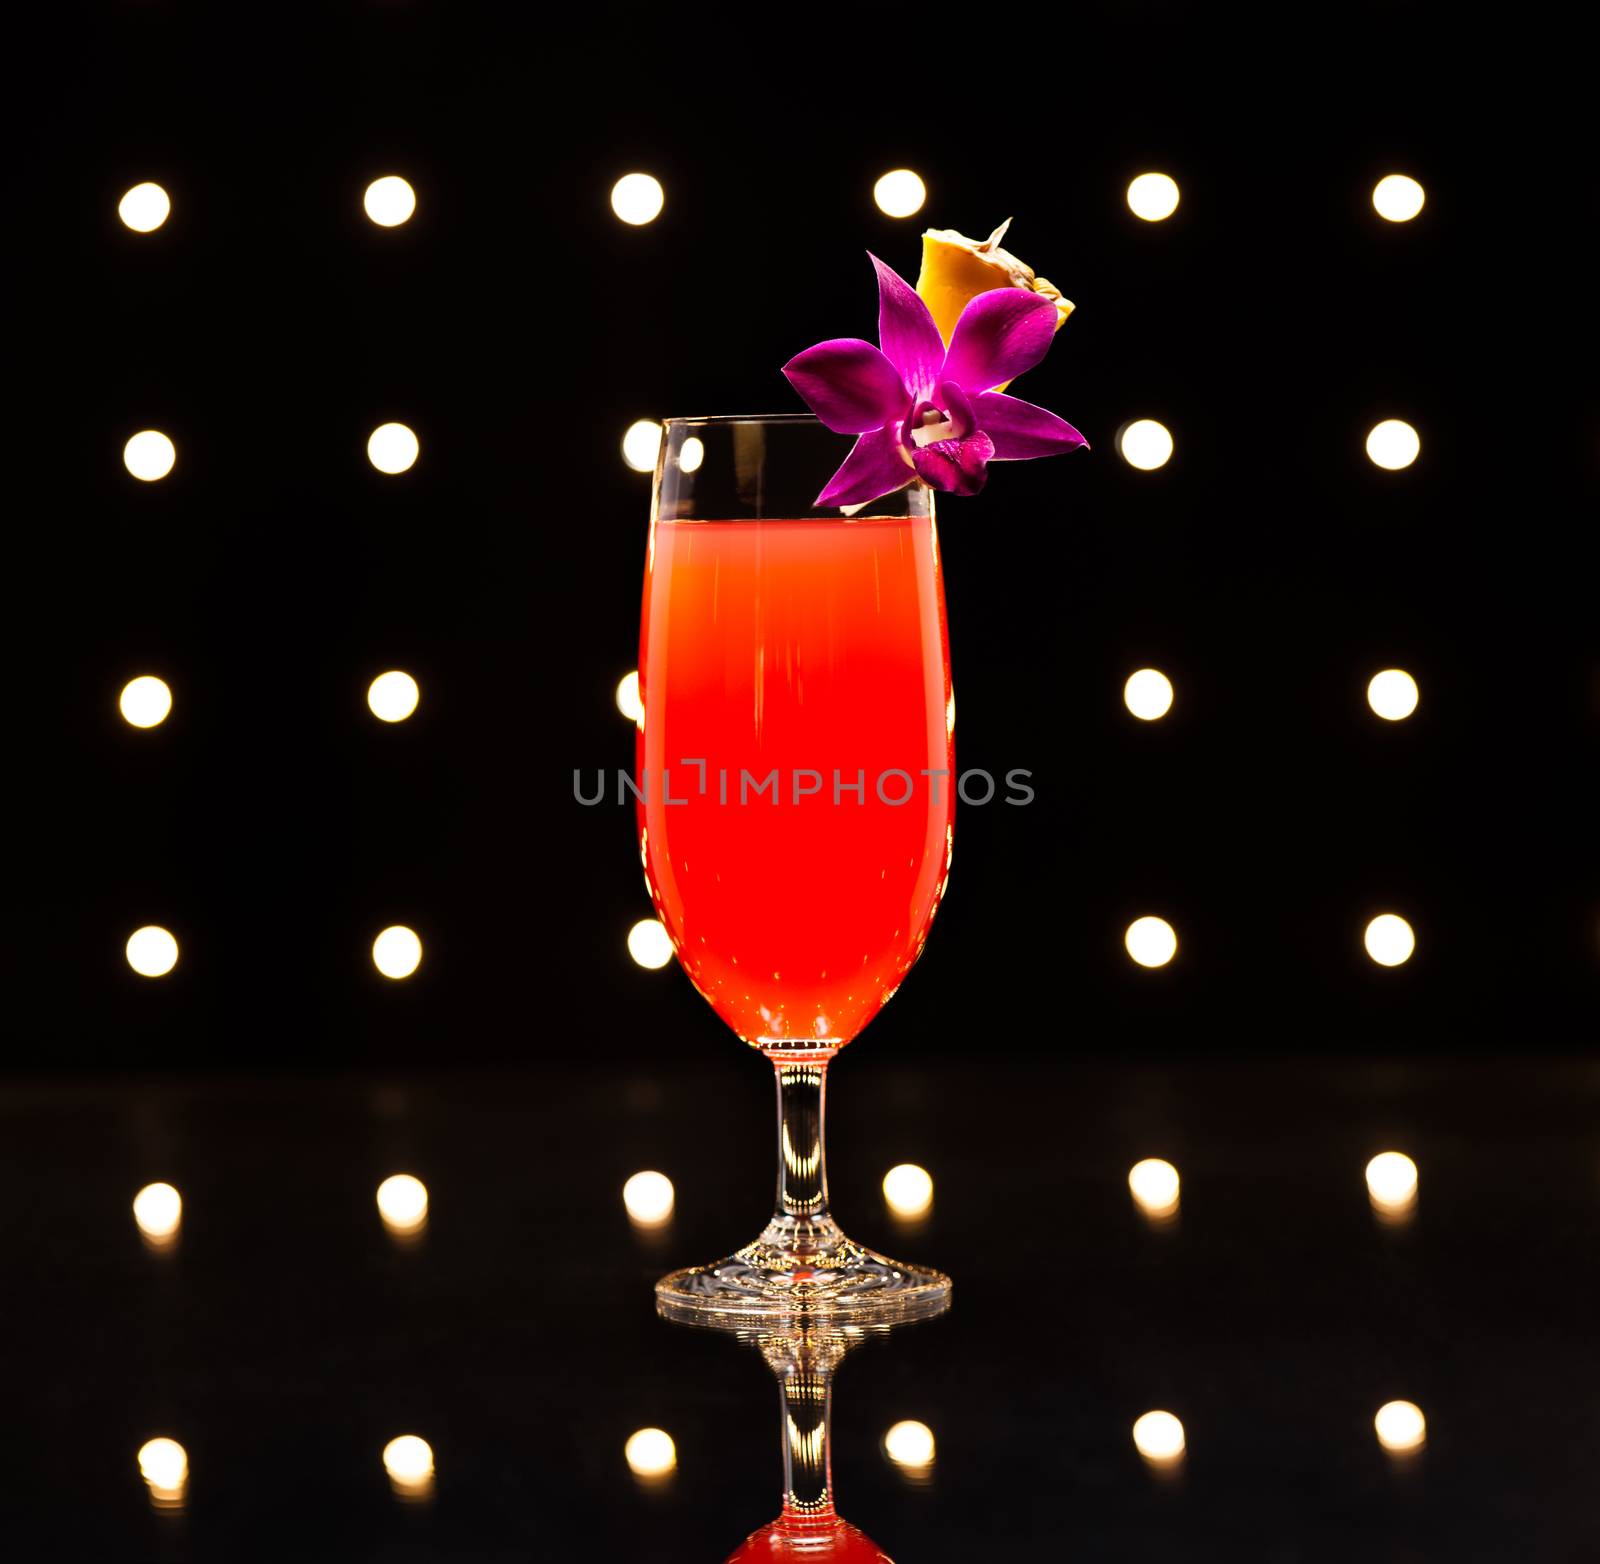 Singapore Sling developed by Ngiam Tong Boon for the Raffles Hotel in Singapore in the early 1900's. The Singapore Sling is a smooth, slow, sweet cocktail with a complex flavor.